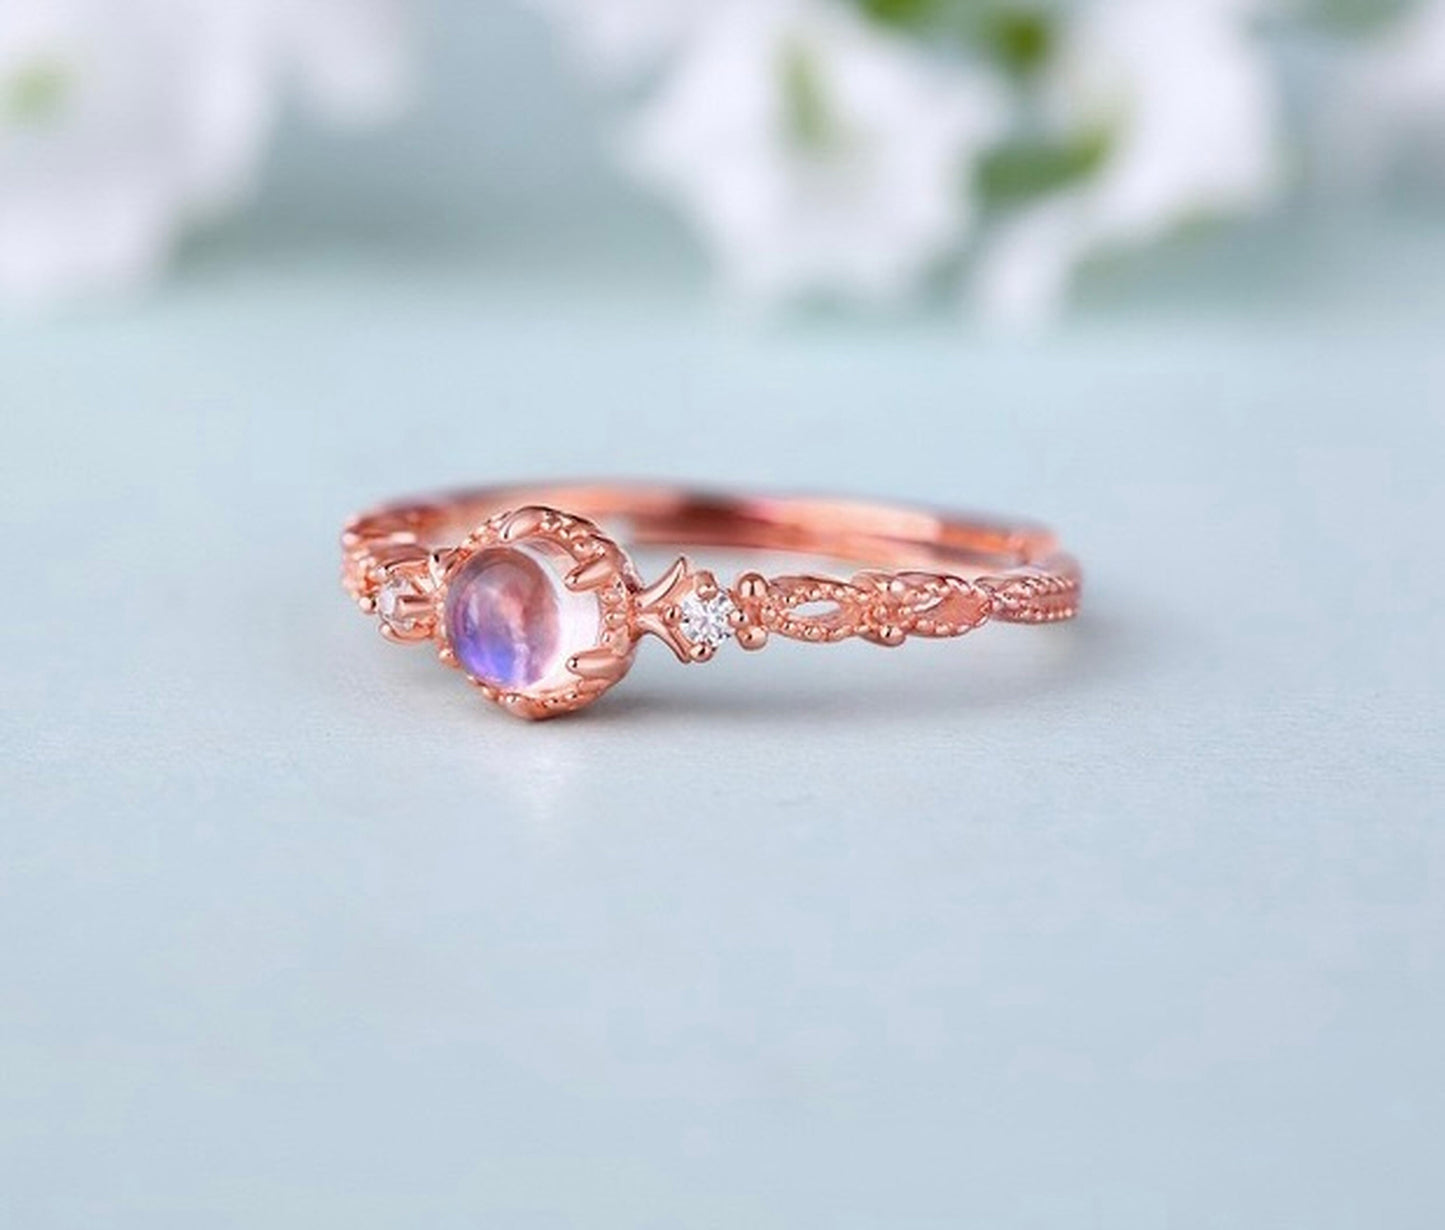 Moonstone energy ring, Rose gold stacking ring, Diamond cz ring, Round moonstone cocktail ring, Open adjustable ring, Dainty birthday gifts